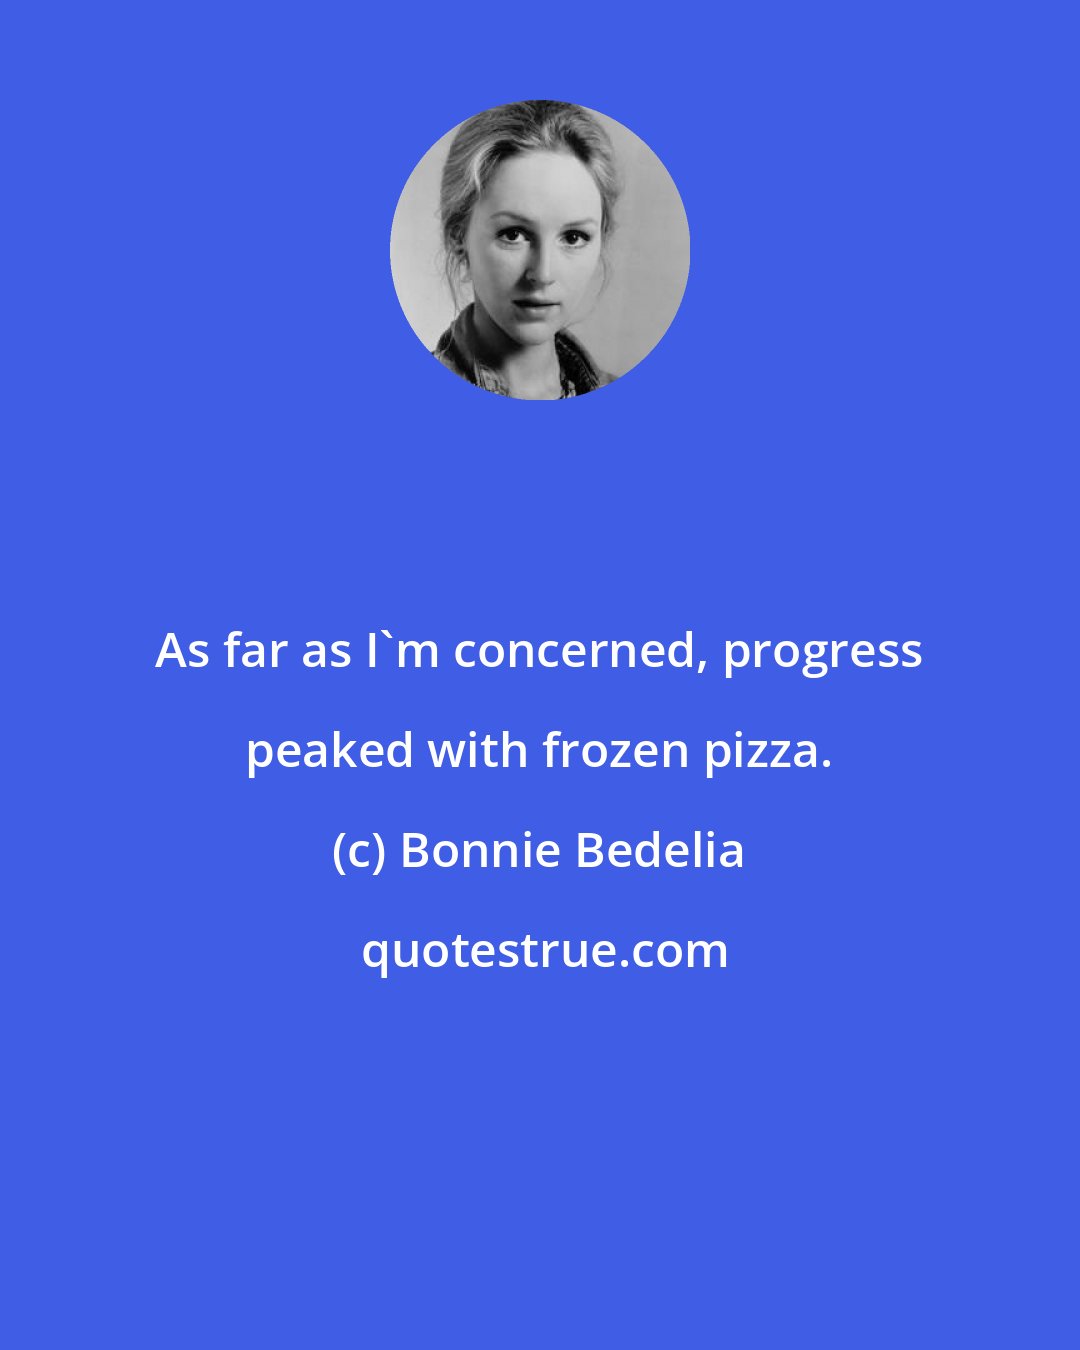 Bonnie Bedelia: As far as I'm concerned, progress peaked with frozen pizza.